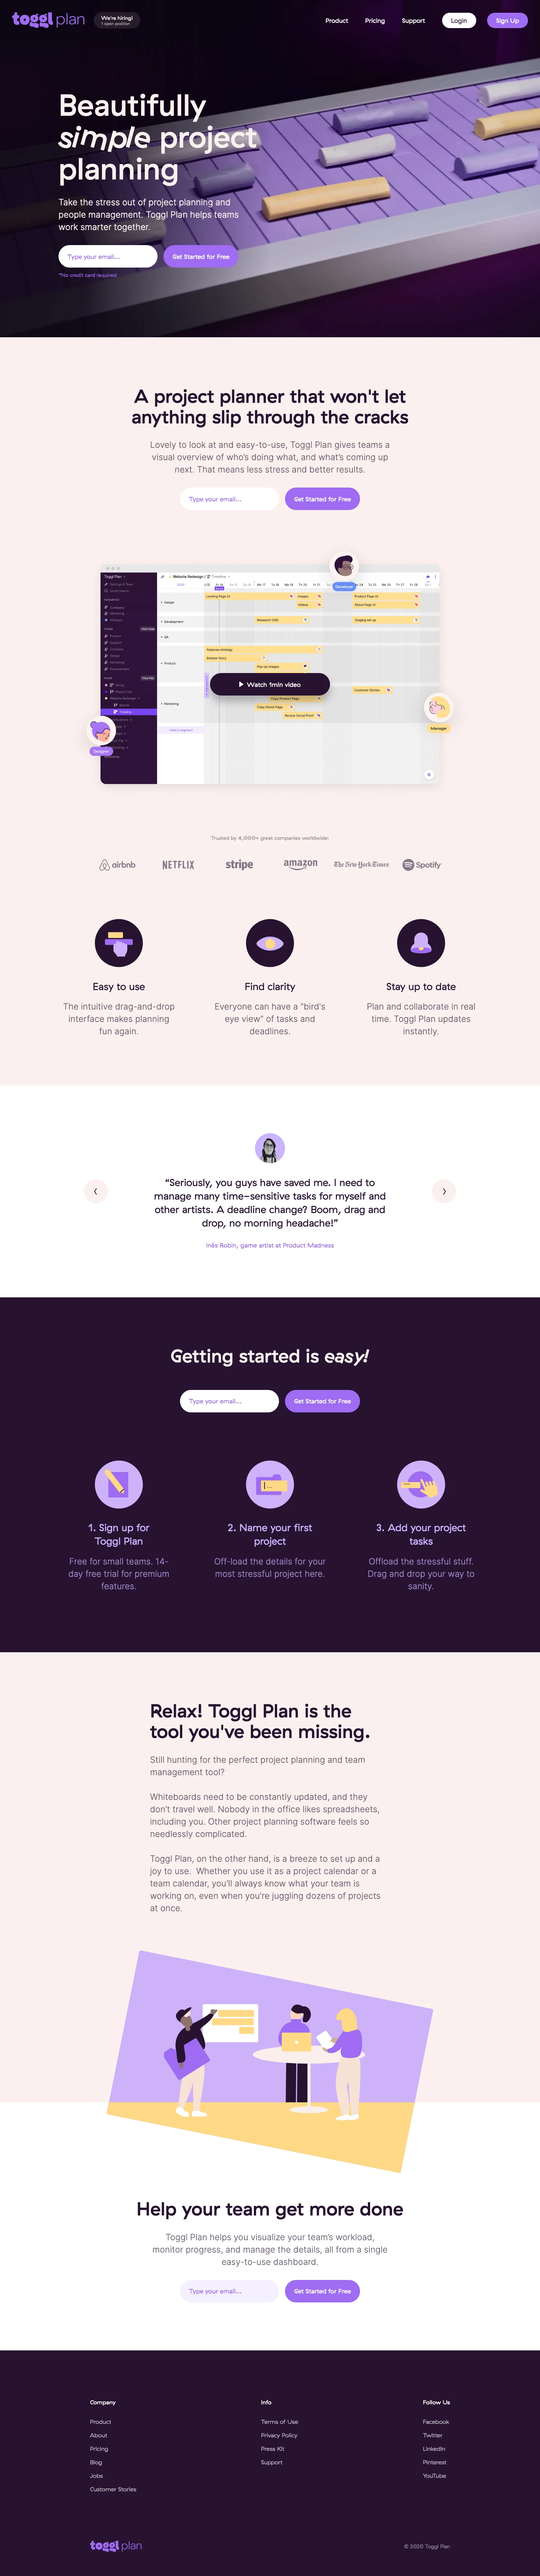 Toggl Plan Landing Page Example: Beautifully simple project planning. Take the stress out of project planning and people management. Toggl Plan helps teams work smarter together.